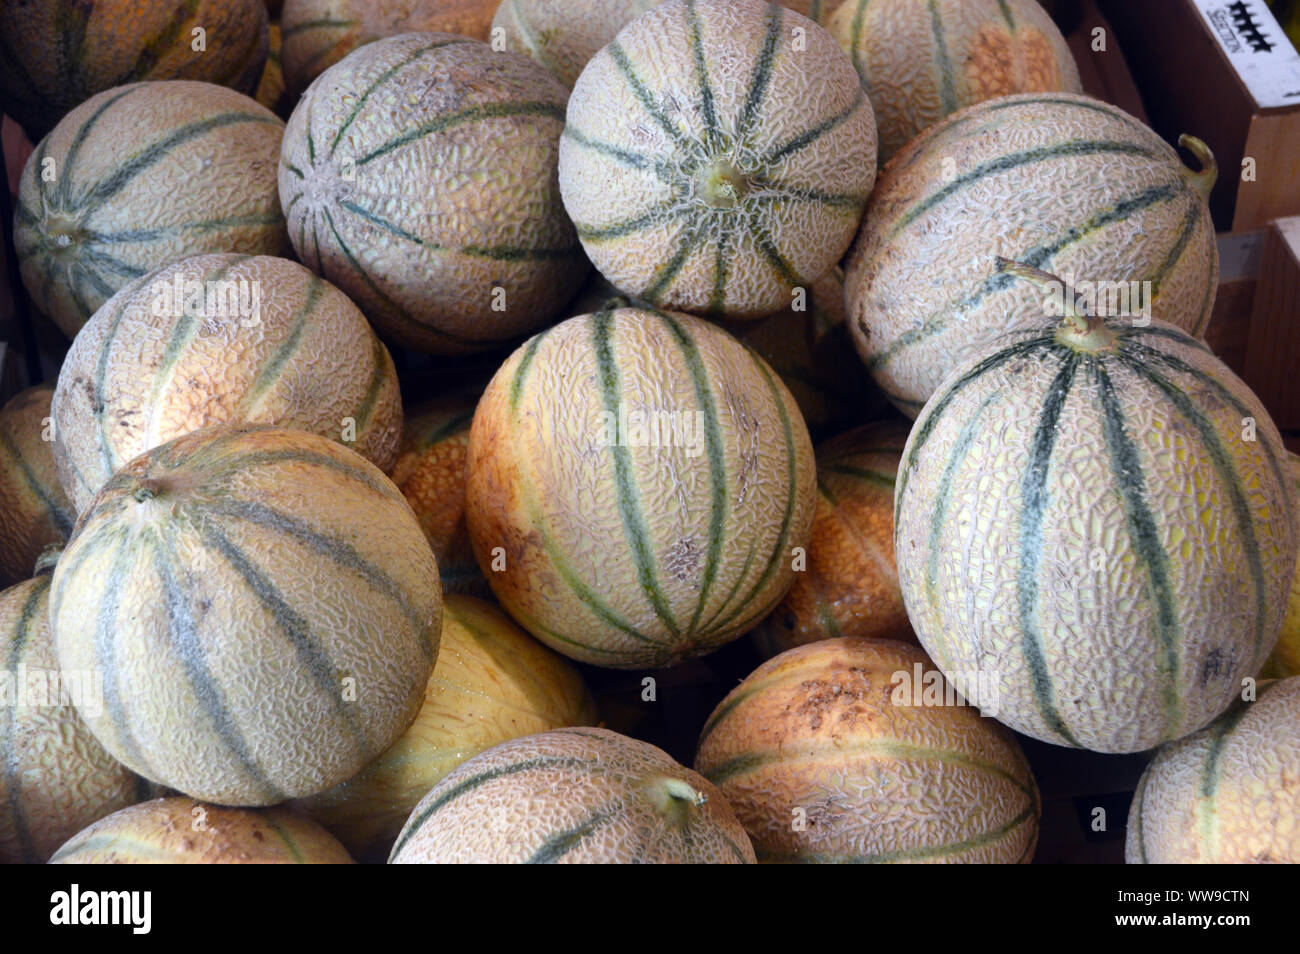 Cantaloupe, rockmelon, sweet melon, or spanspek Melons on Display in Forville Covered Market, Cannes, France, EU Stock Photo